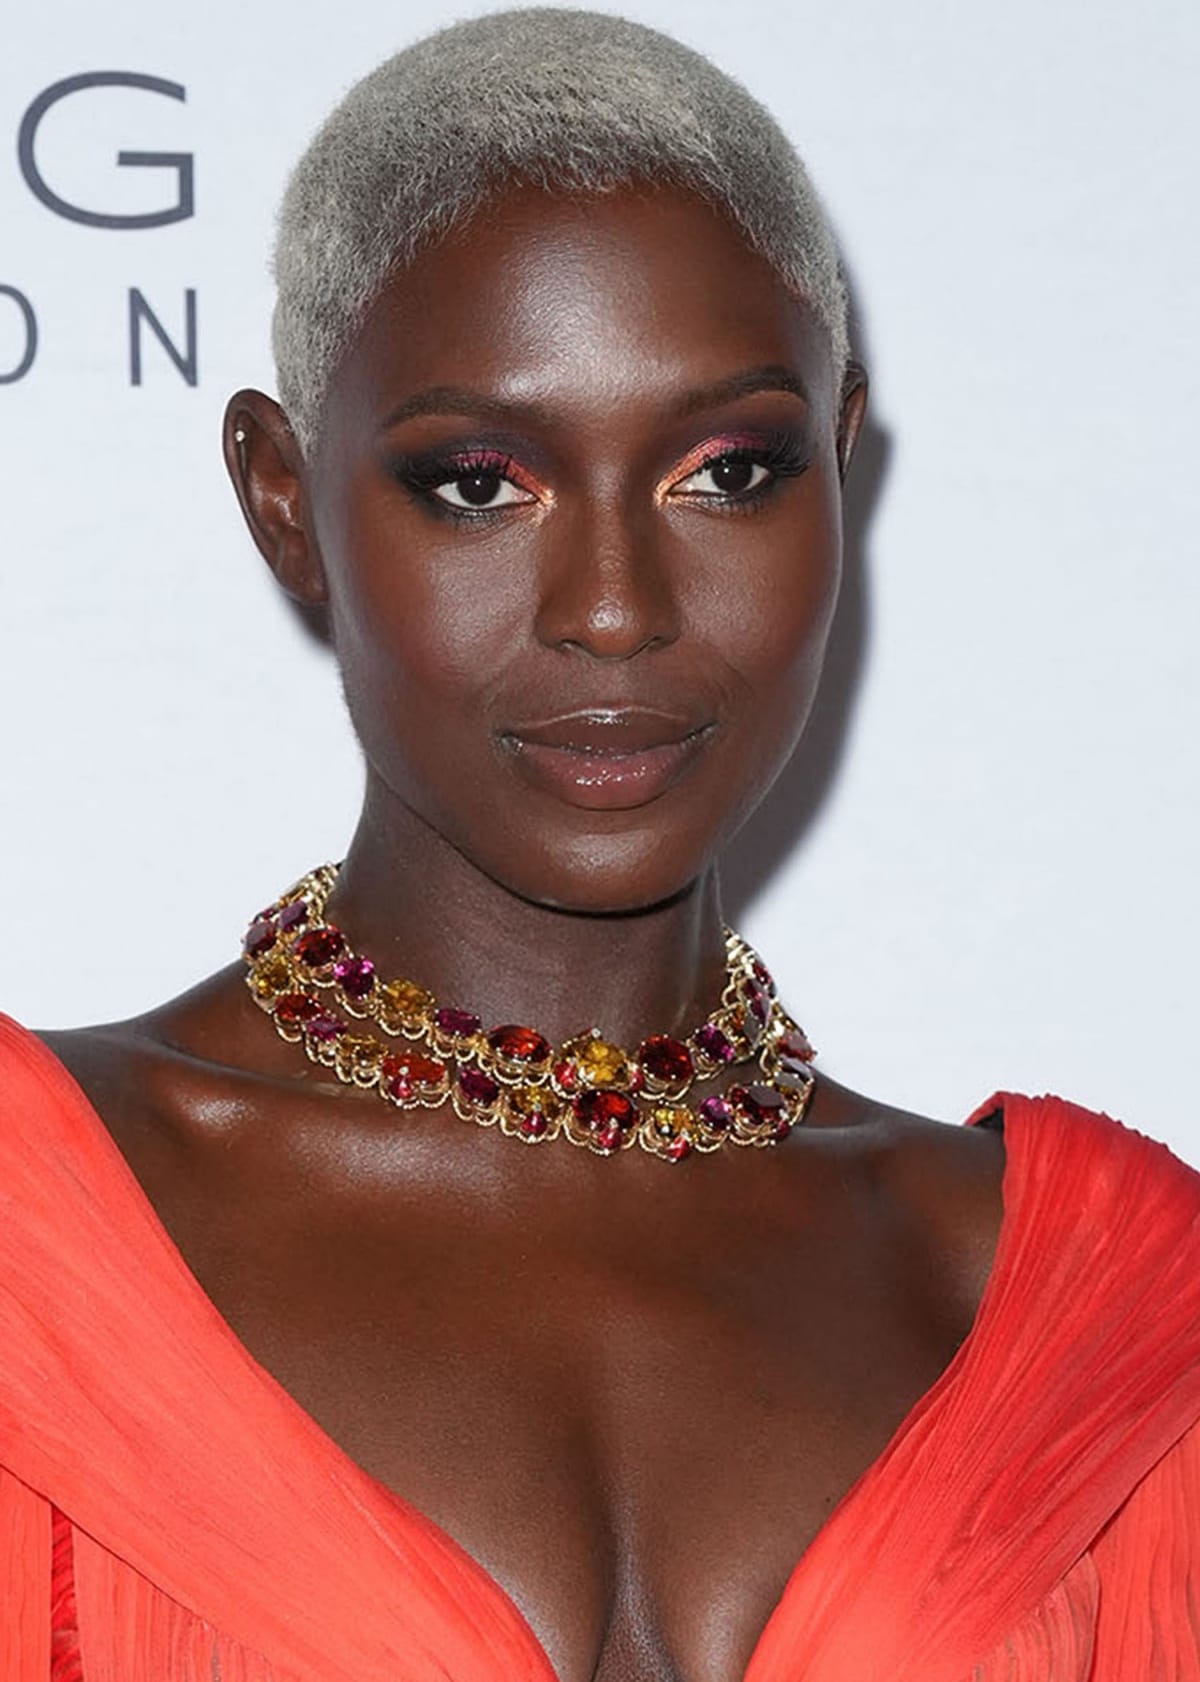 Jodie Turner-Smith rocking a blonde buzz cut, shimmery eye makeup, and a ruby necklace from Bulgari